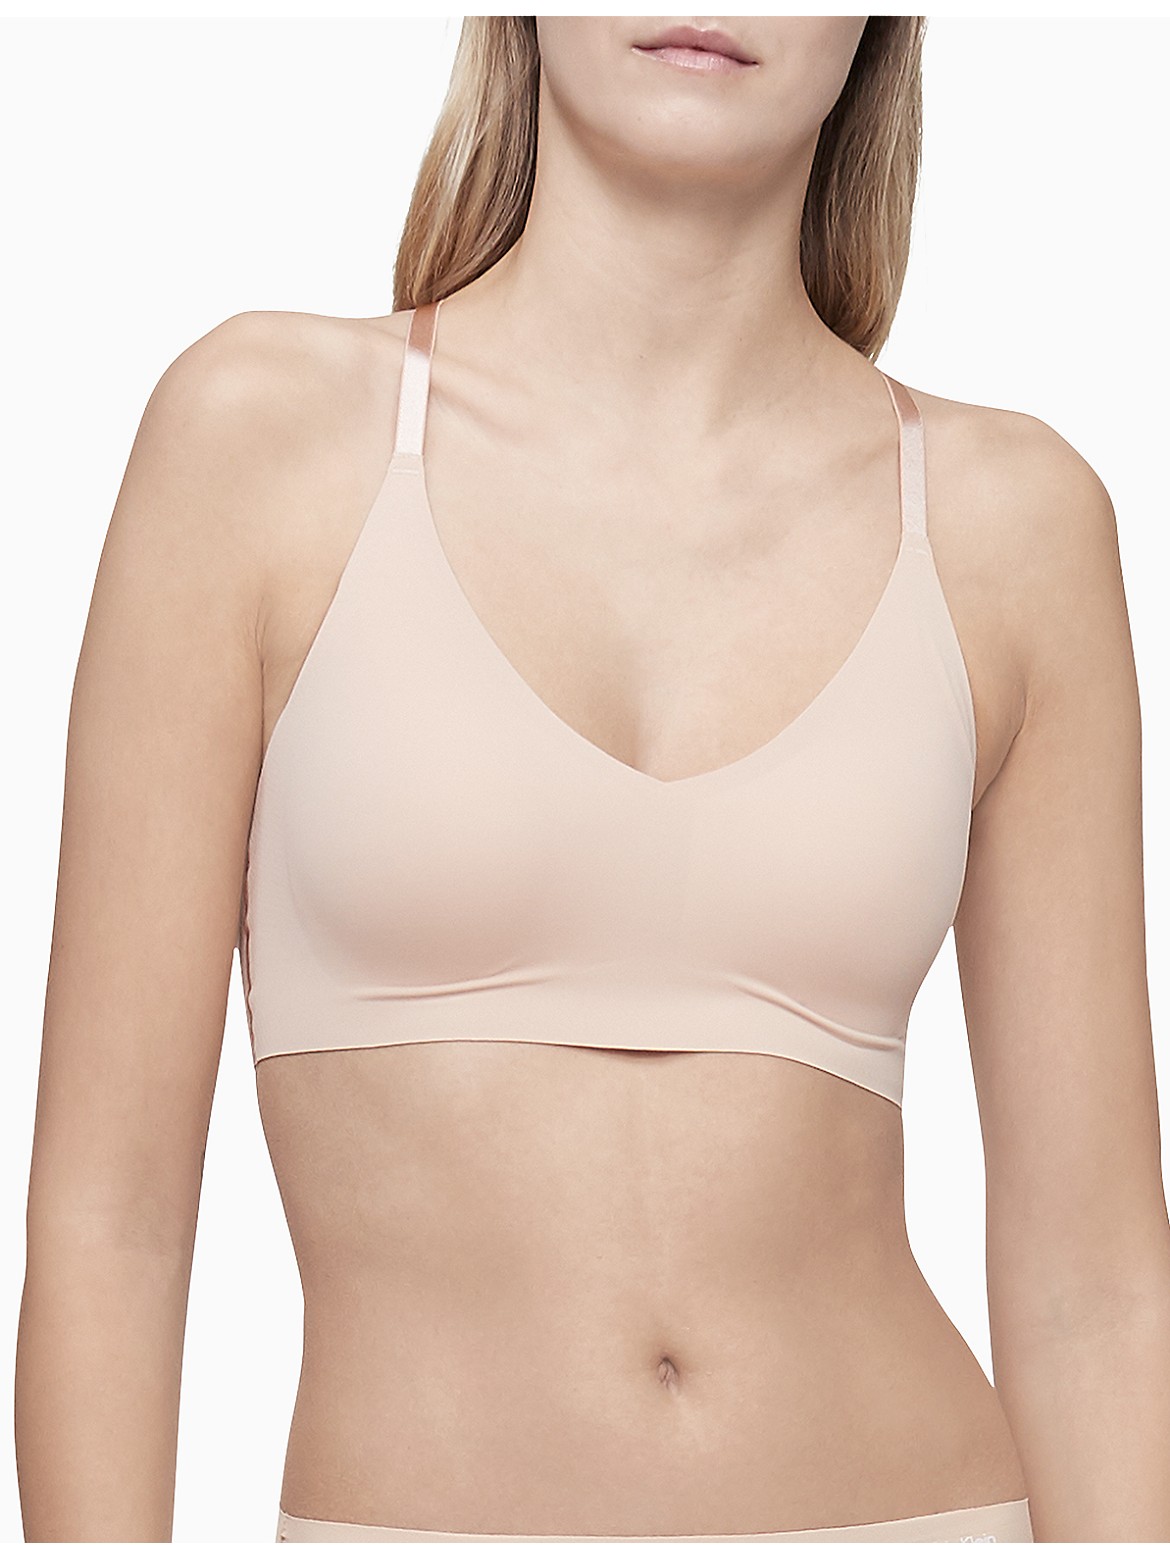 Calvin Klein Women's Invisibles Lace Lightly Lined Bralette - Neutral - XS